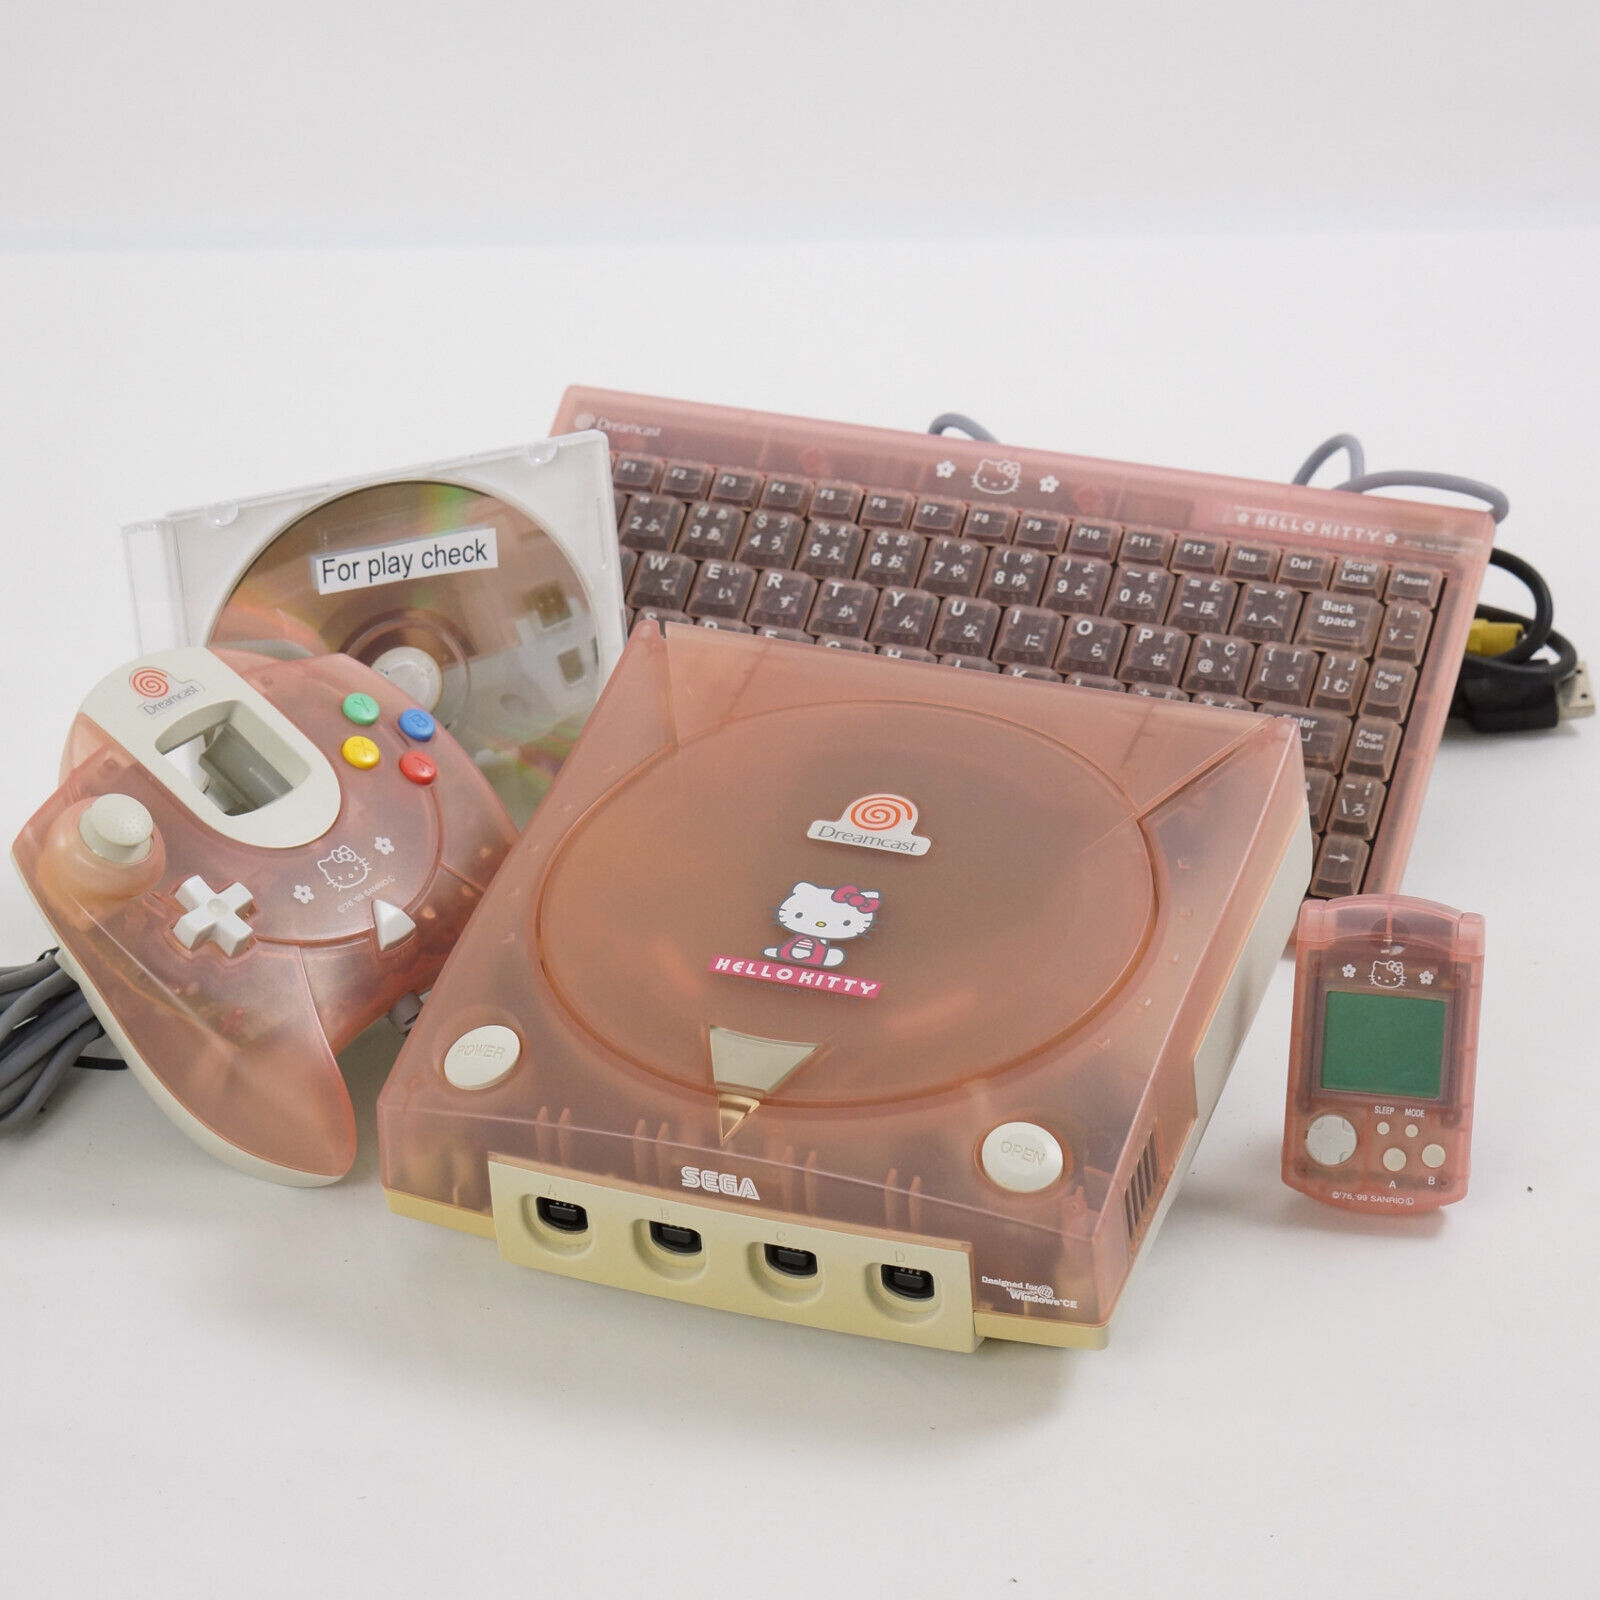 Dreamcast SEGA DC HELLO KITTY PINK Console System Tested JAPAN Ref